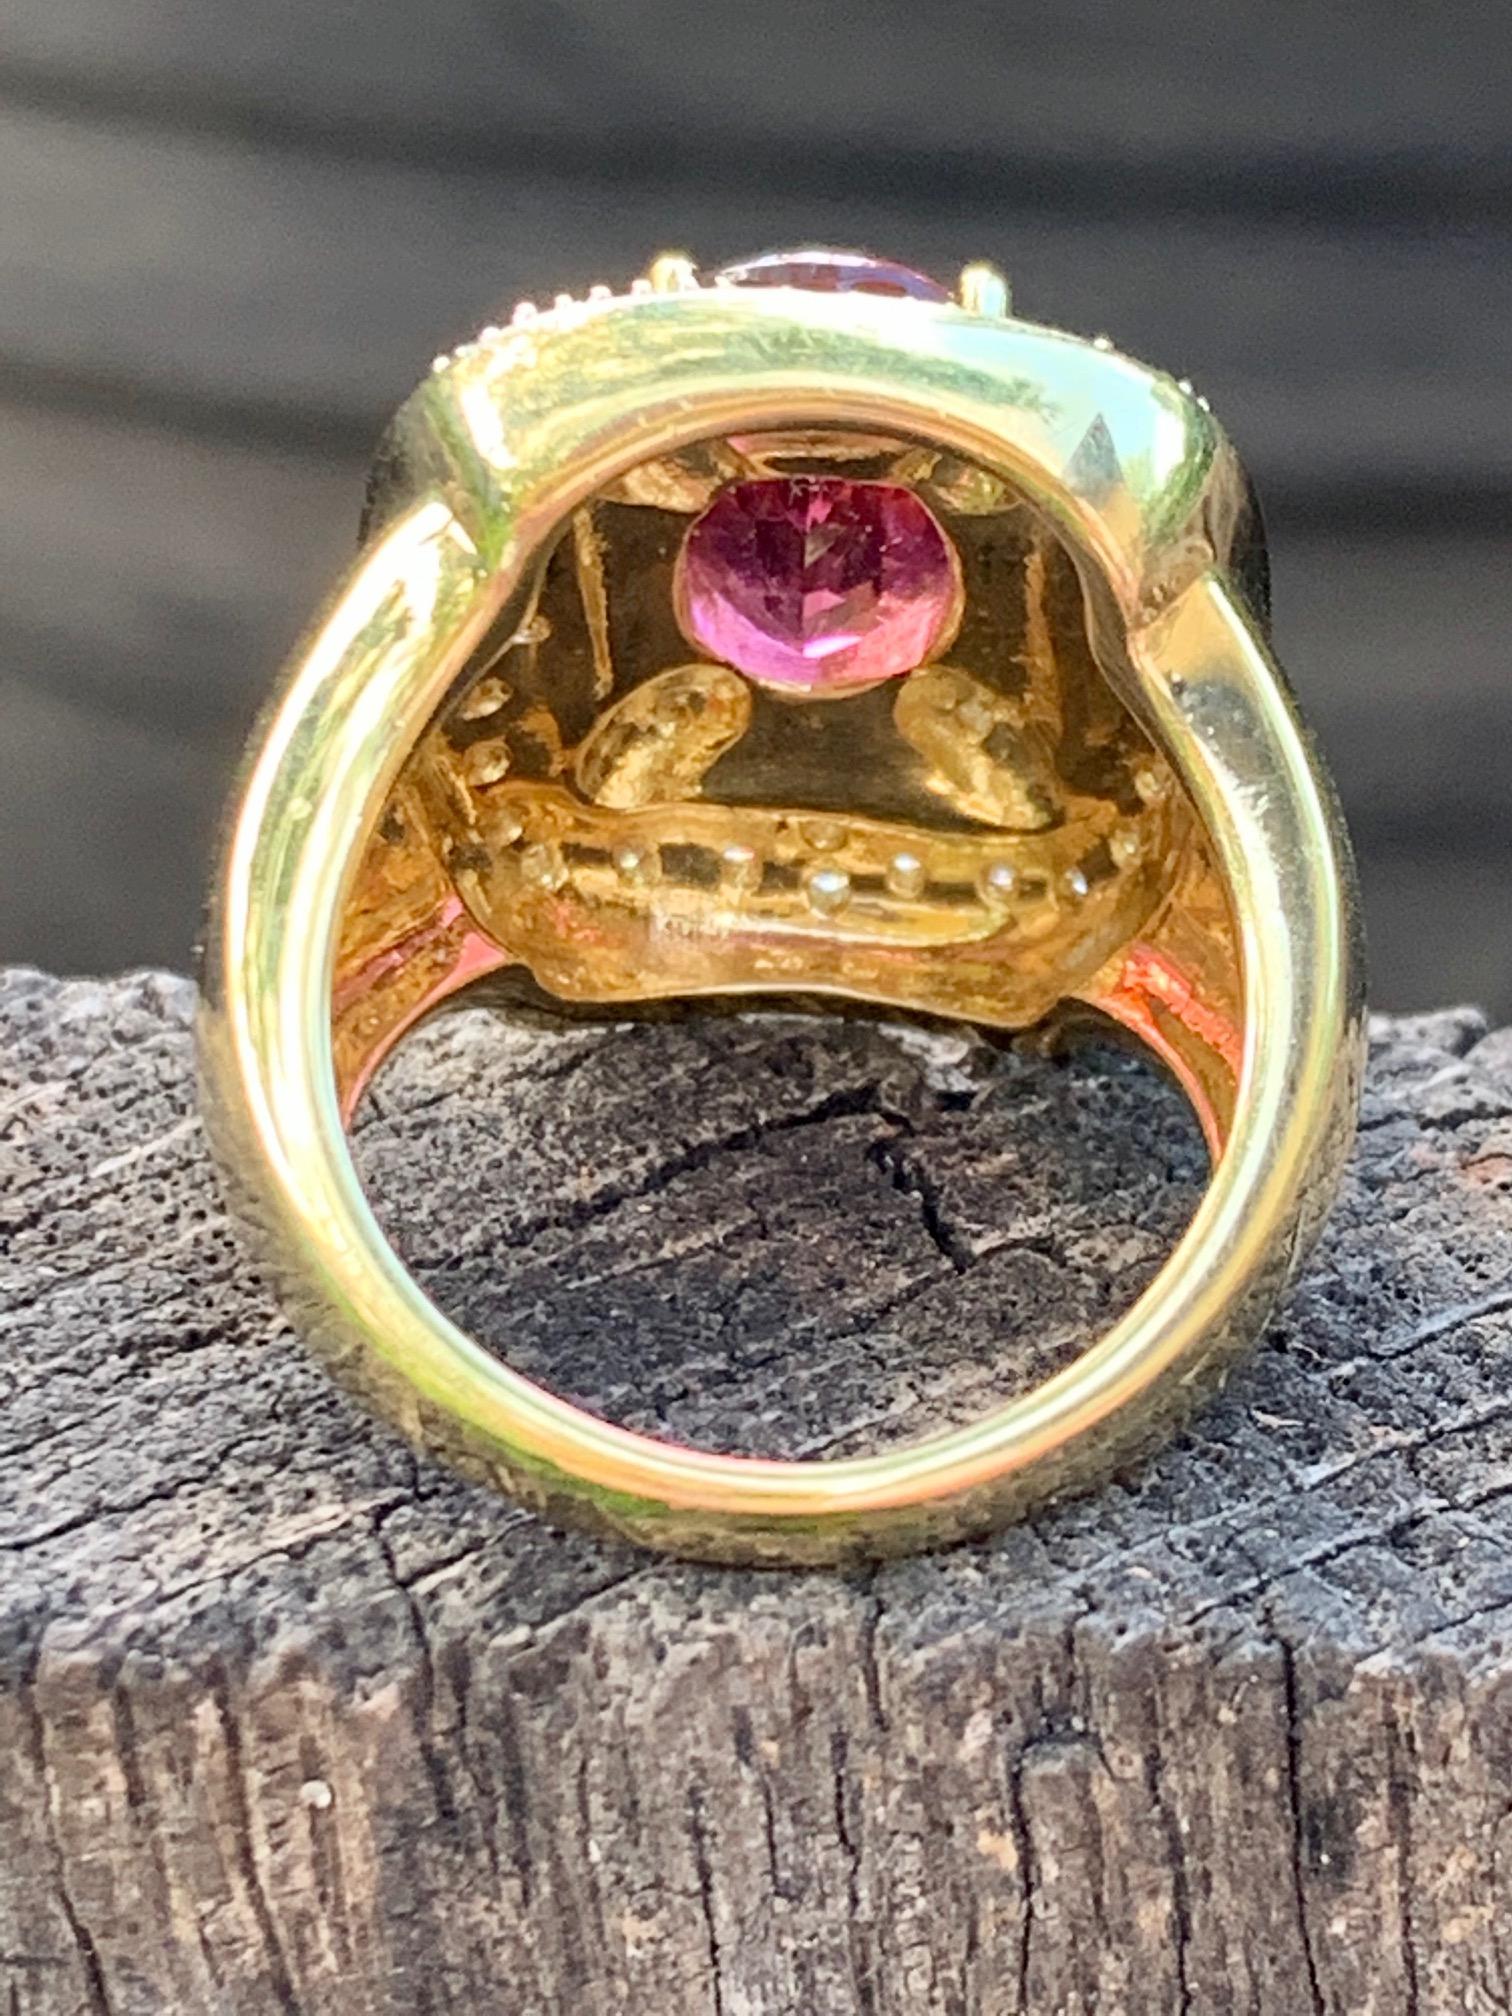 This modern 18K Rubellite Pink Tourmaline and Diamond fashion ring is stamped 18k and includes a designer's mark.

The Pink Tourmaline stone is approximately 3/8